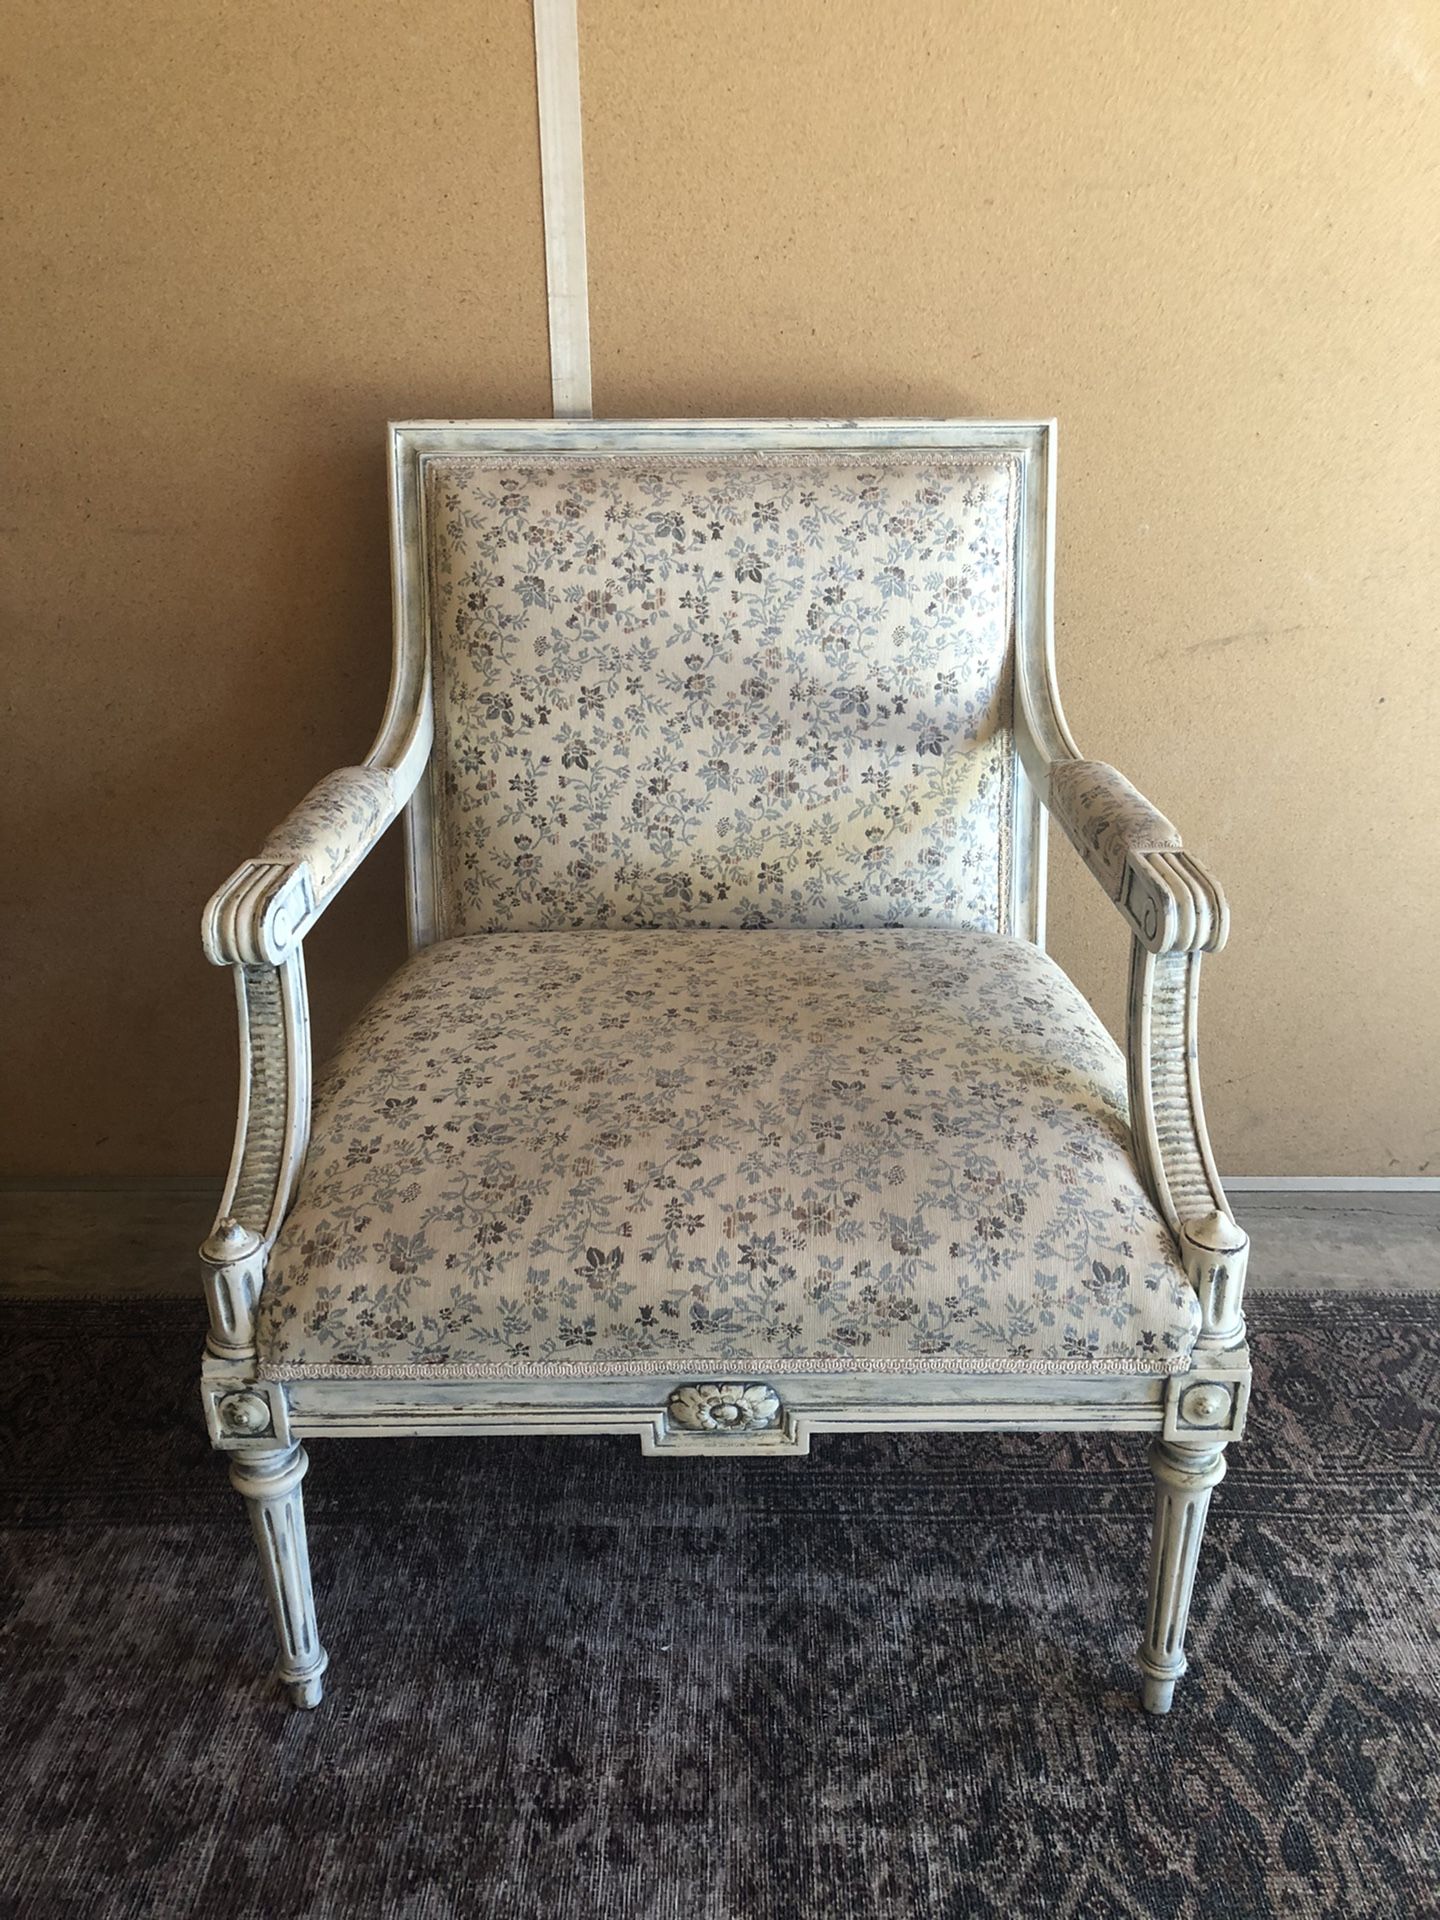 Antique Chippy Blue And White Floral Chair Farmhouse 